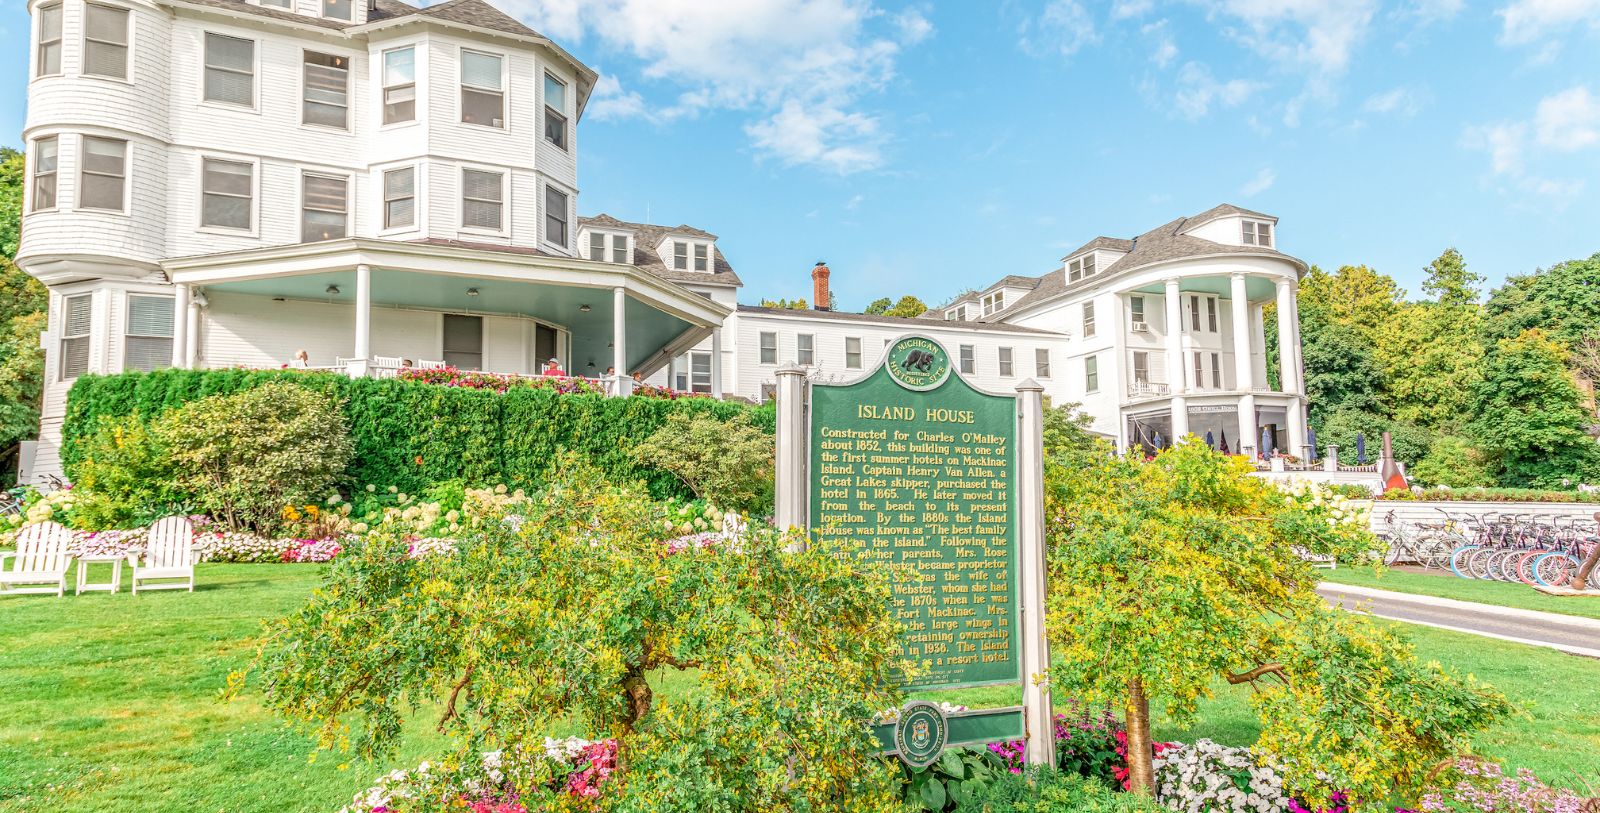 Image of Historic Sign, Island House Hotel in Mackinac Island, Michigan, 1852, Member of Historic Hotels of America, Experience